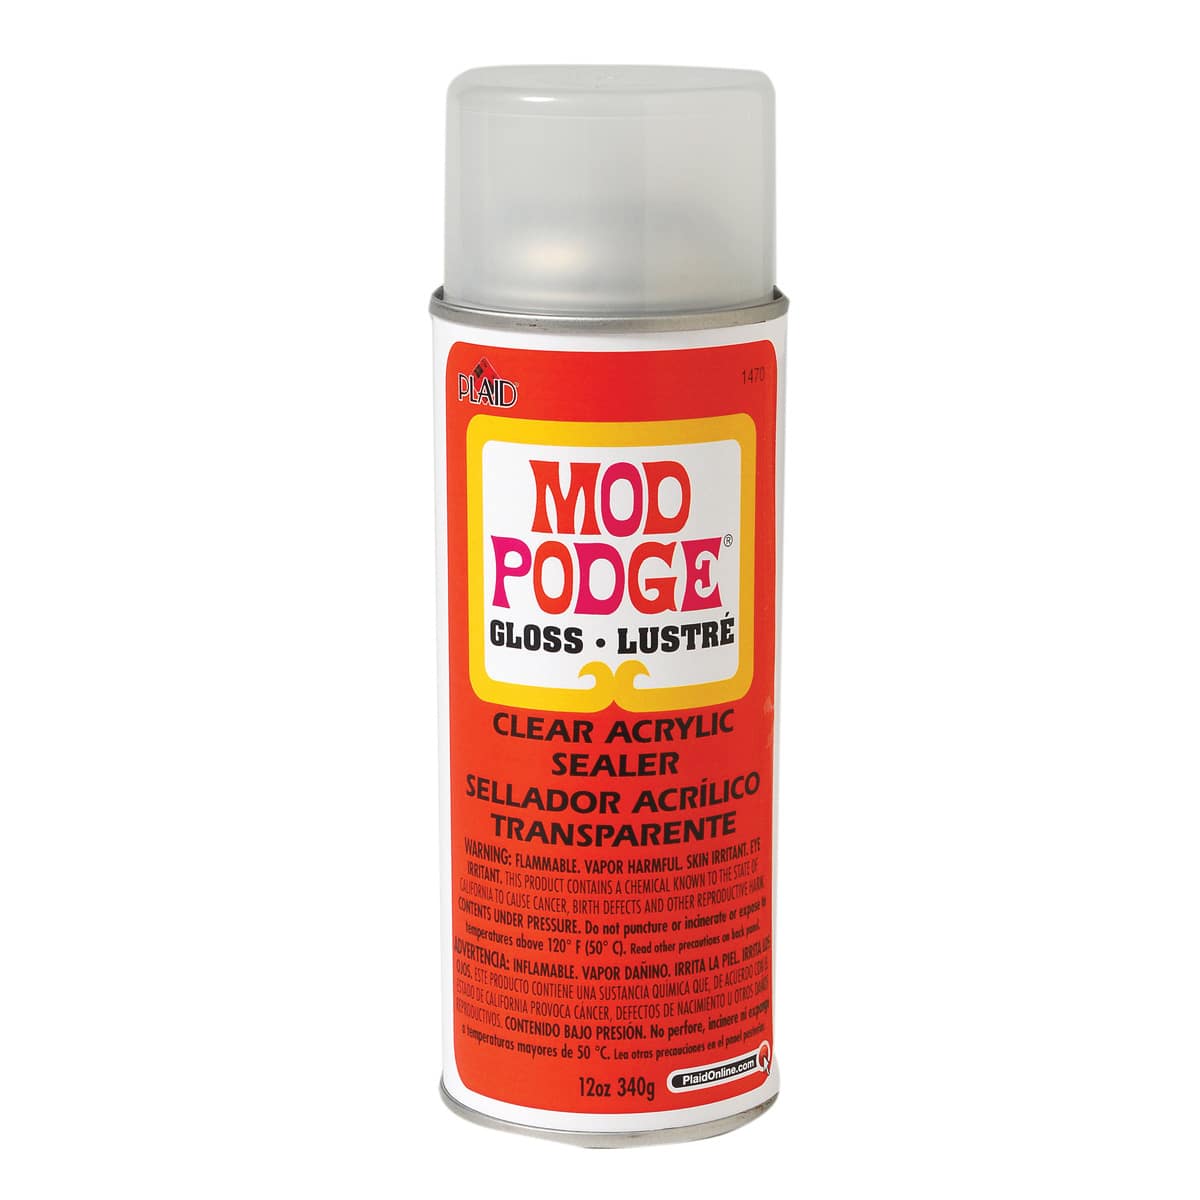  Mod Podge Spray Acrylic Sealer that is Specifically Formulated  to Seal Craft Projects, 12 ounce, Gloss & CS11202 Waterbase Sealer, Glue &  Decoupage Finish, 16 oz, Gloss, 16 Fl Oz